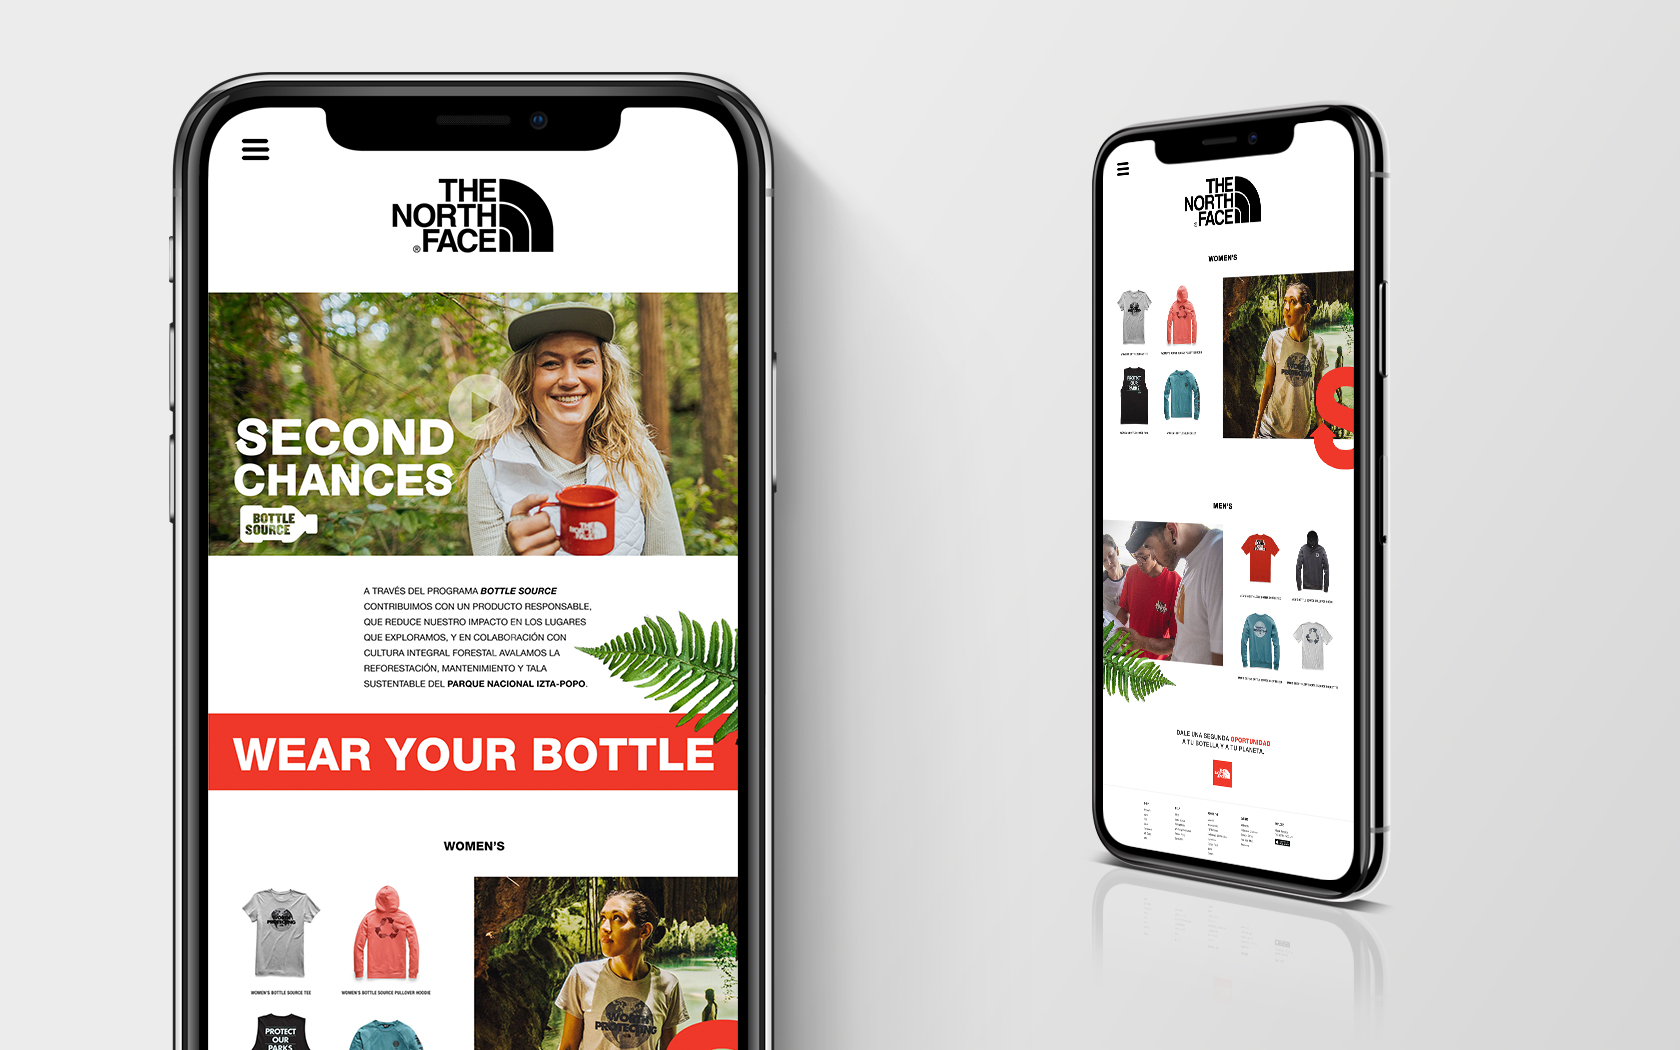 The North Face Bottle Source